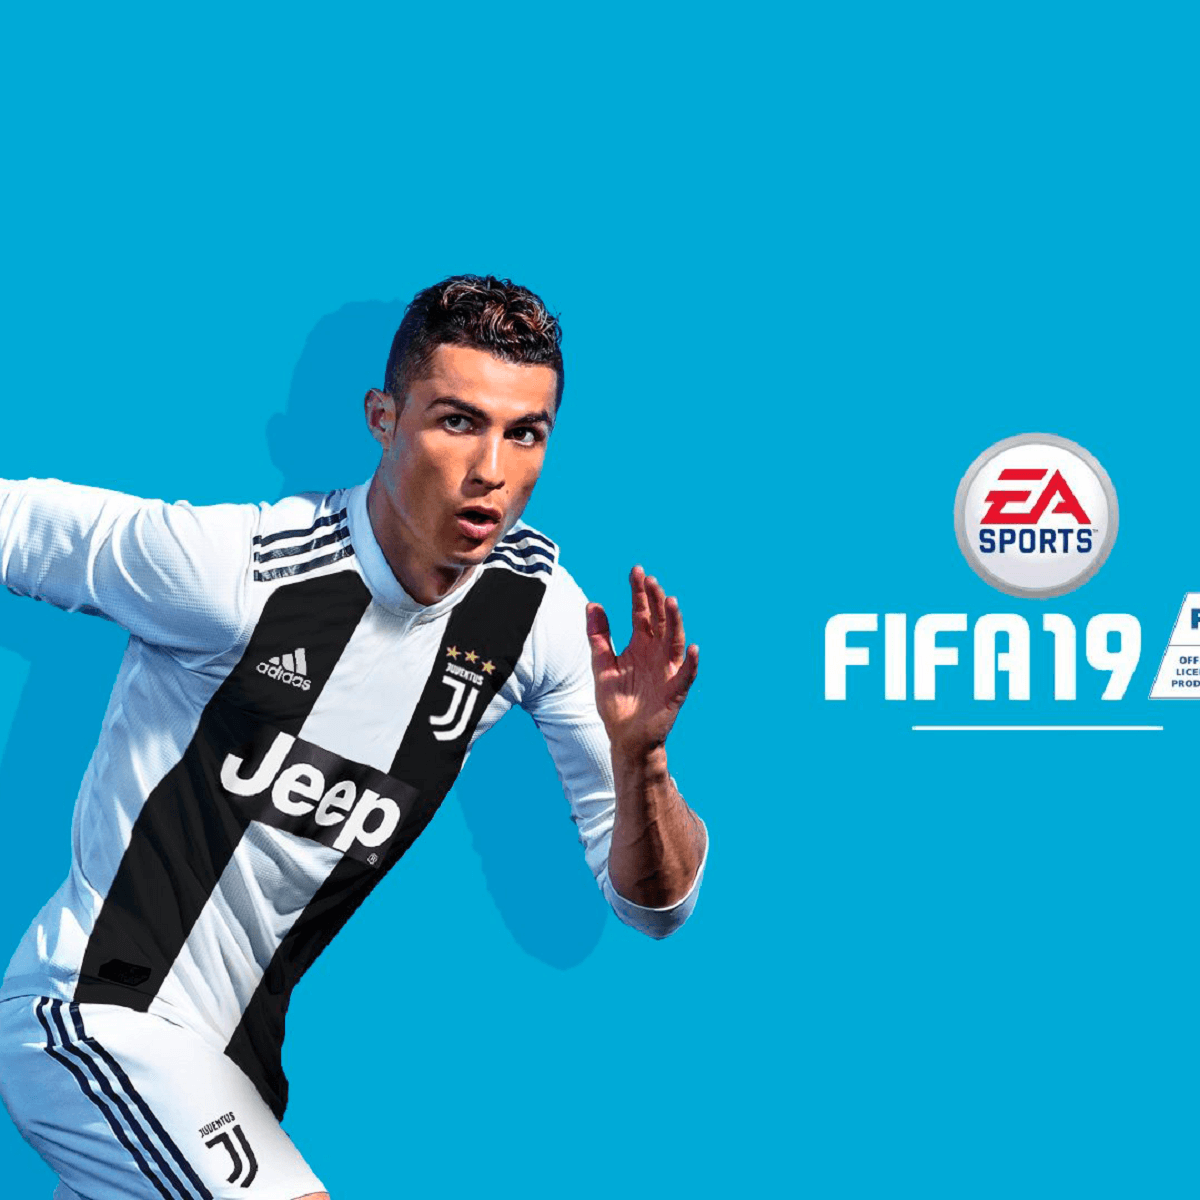 an update to this title is required before fifa 19